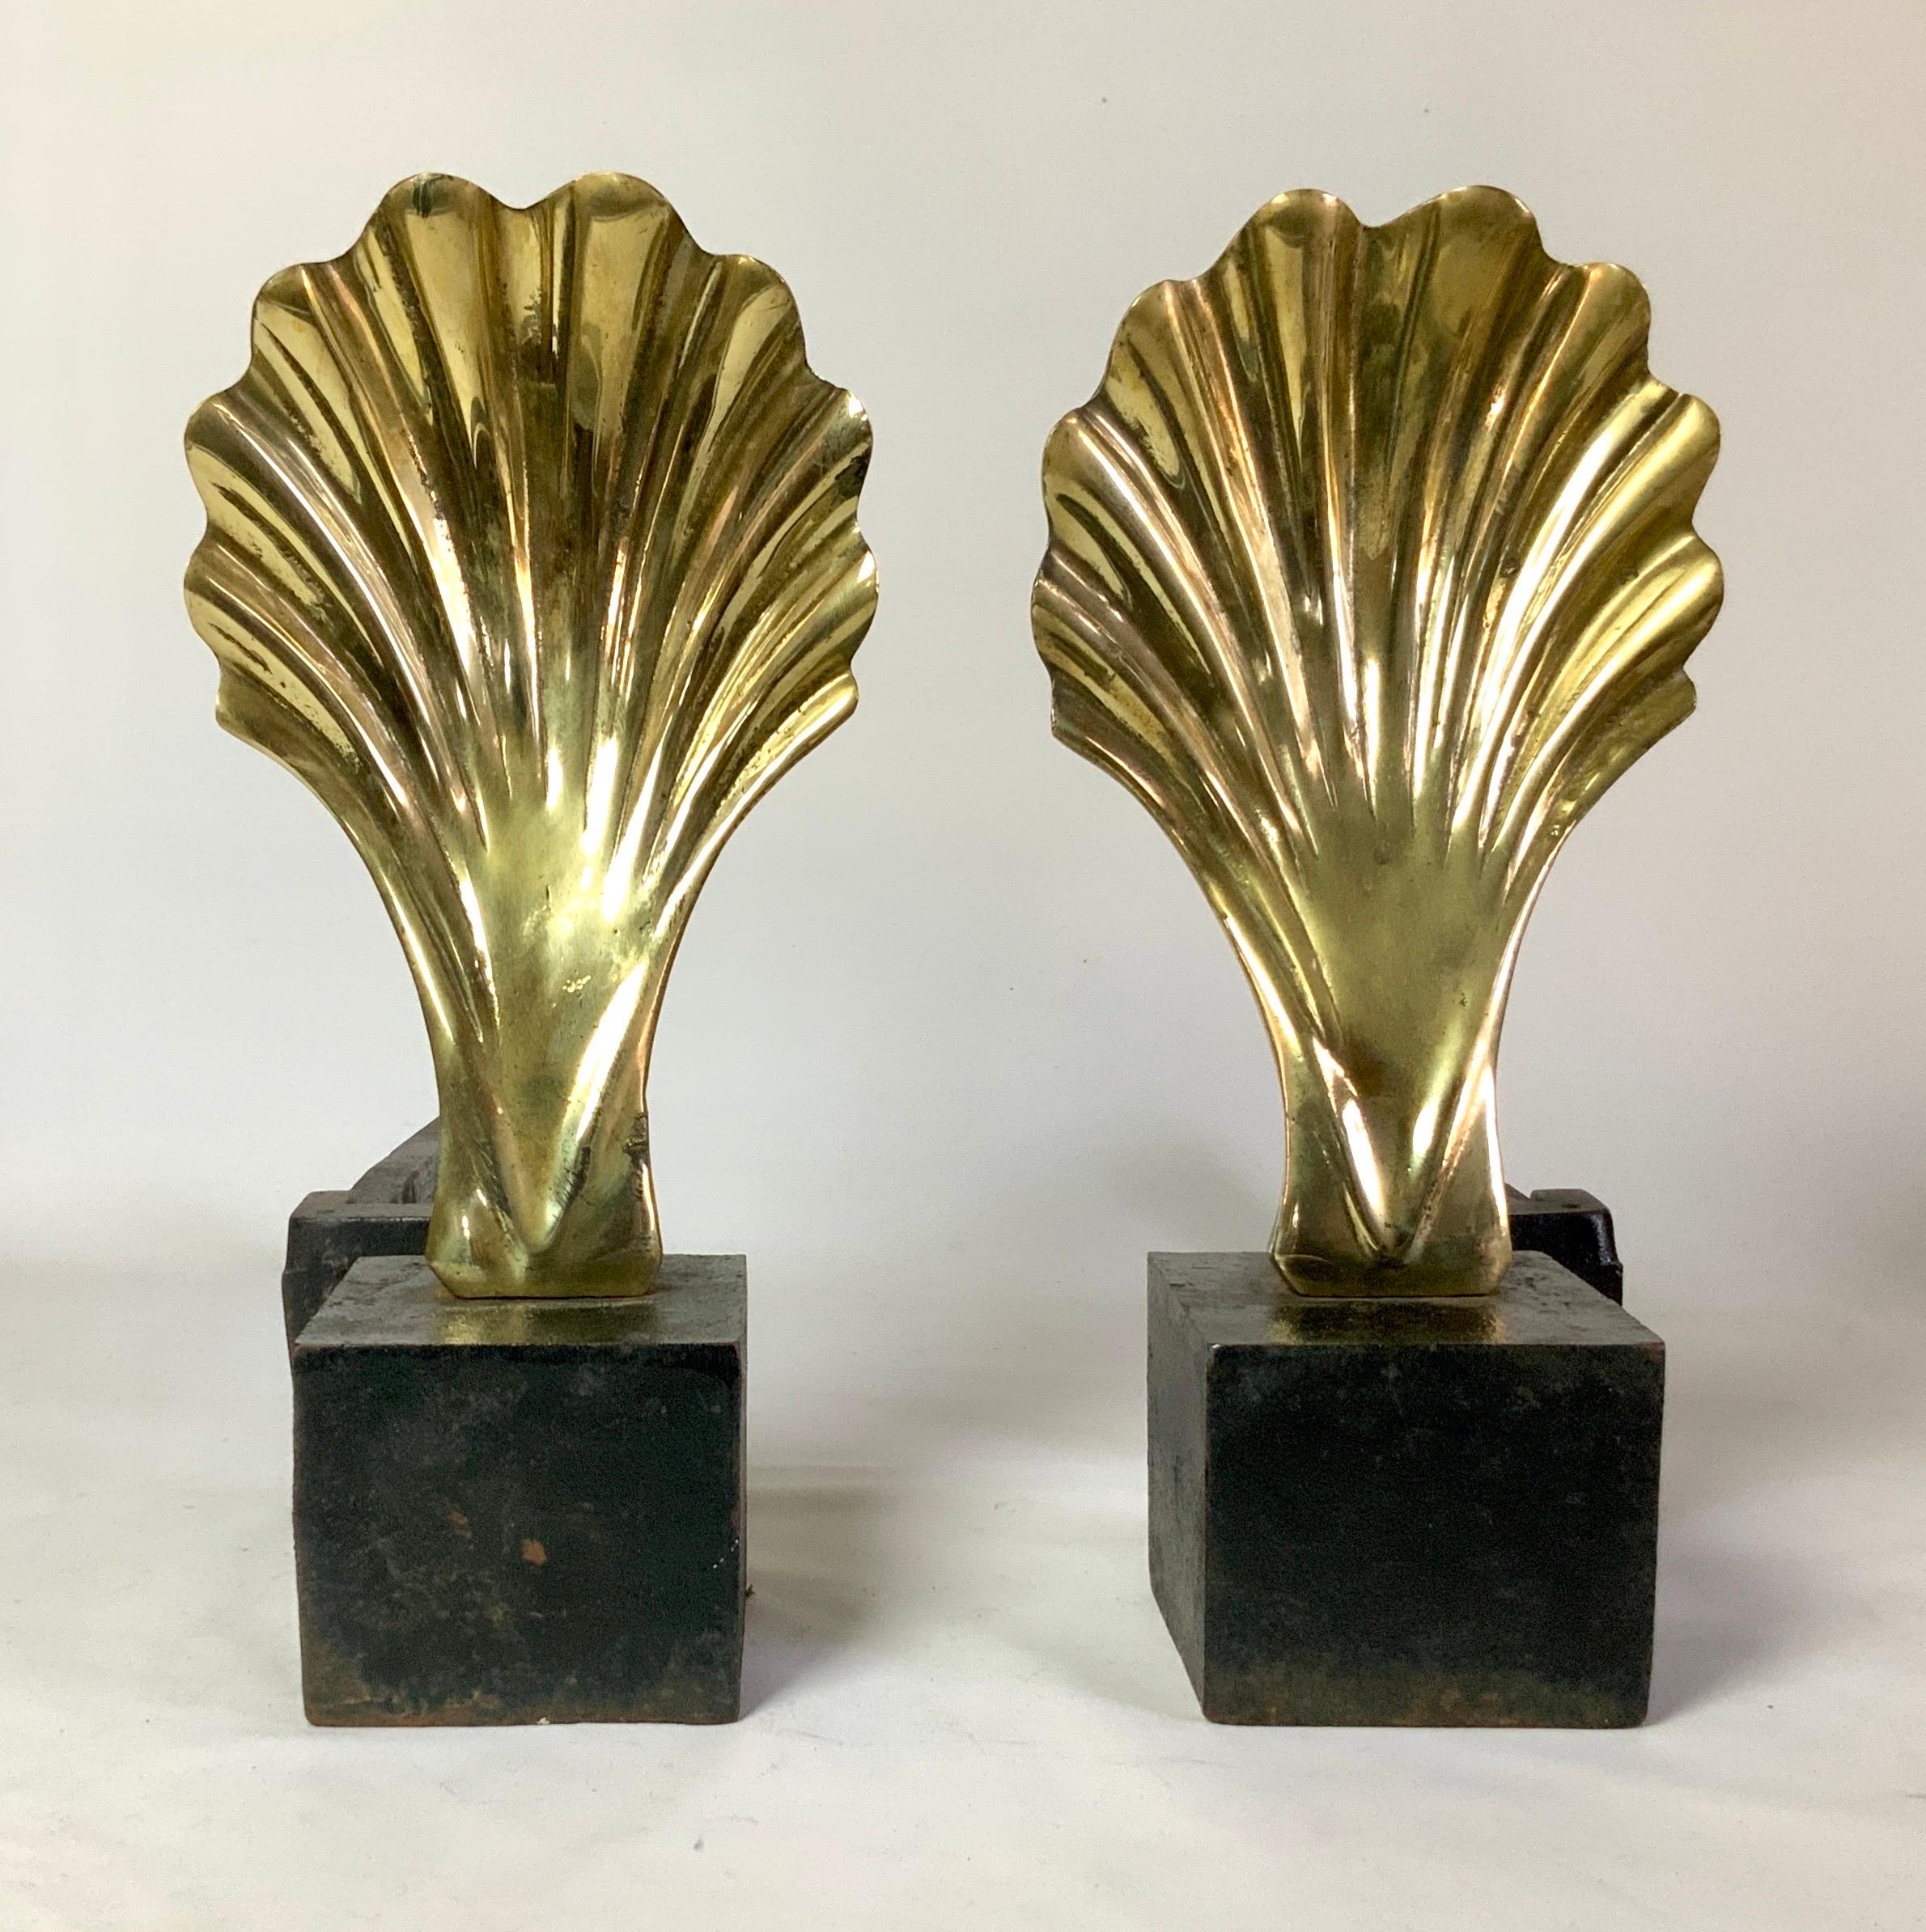 Vintage Hollywood Regency Style Brass Shell Fireplace Andirons, A Pair 

Impressive Dorothy Draper scalloped edge style. This vintage set has a wonderful appeal as apparent with shells being solid brass. This pair are very versatile and can be mixed